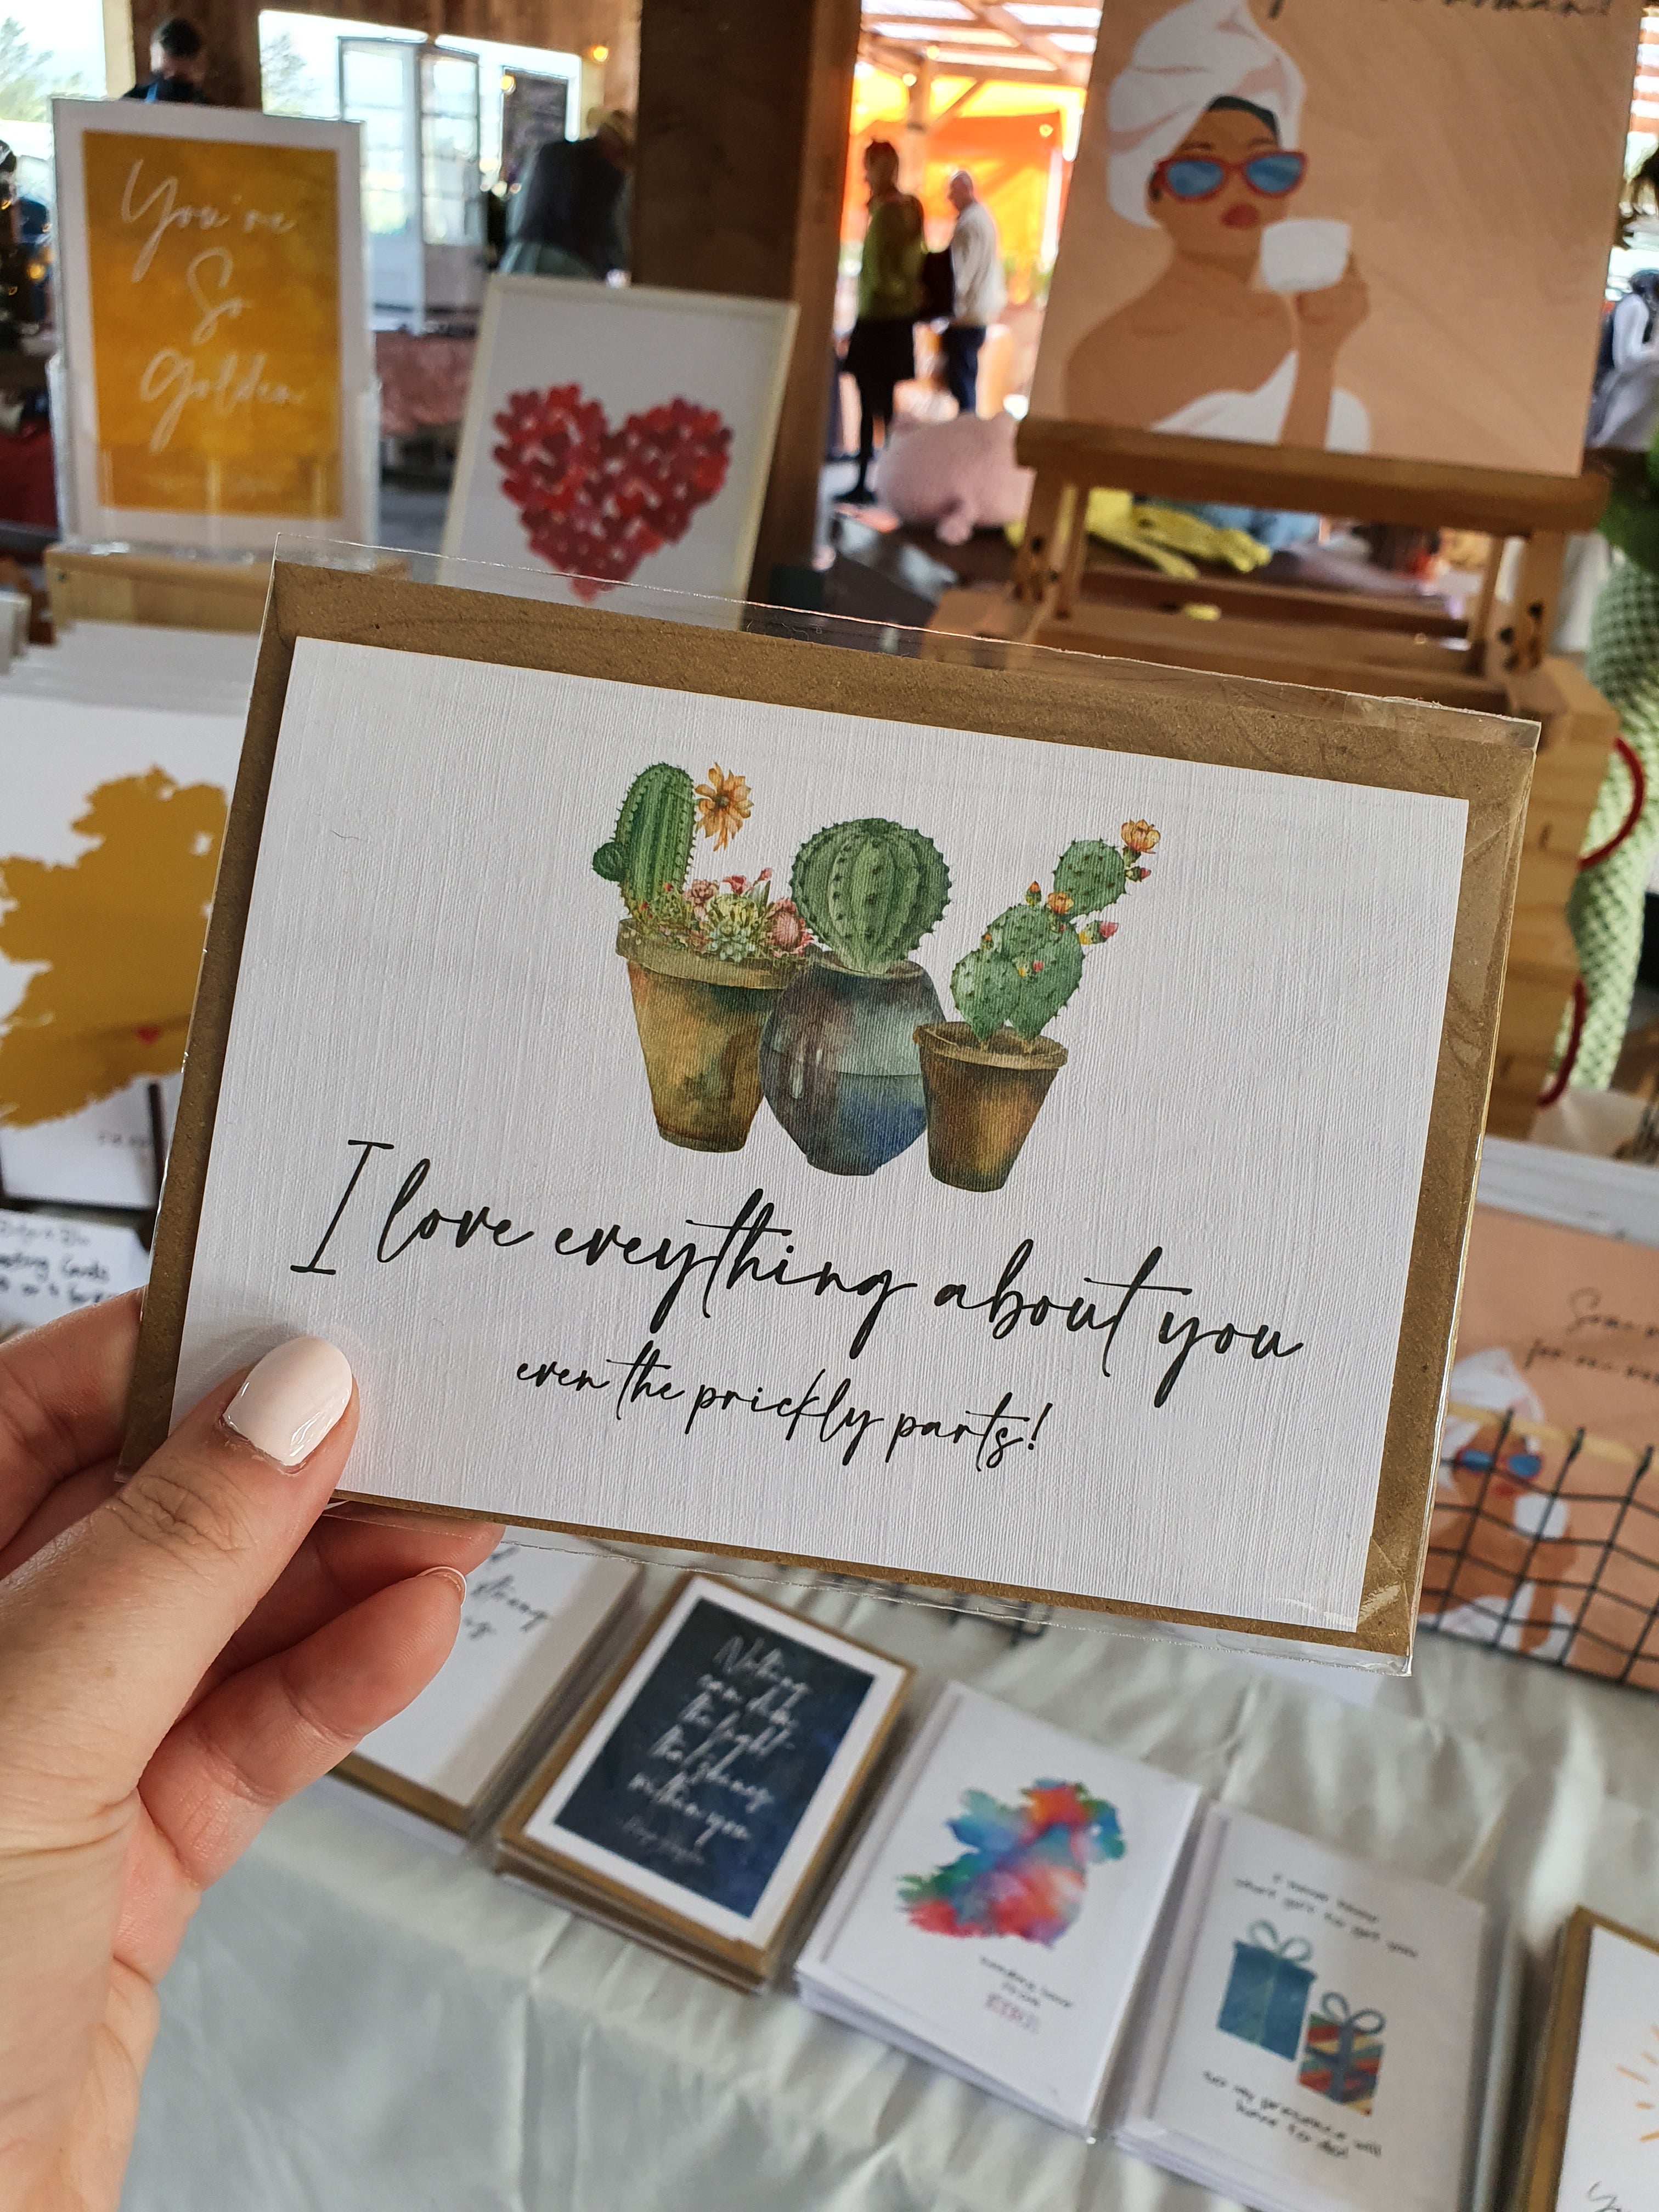 Even The Prickly Parts! - Greeting Card